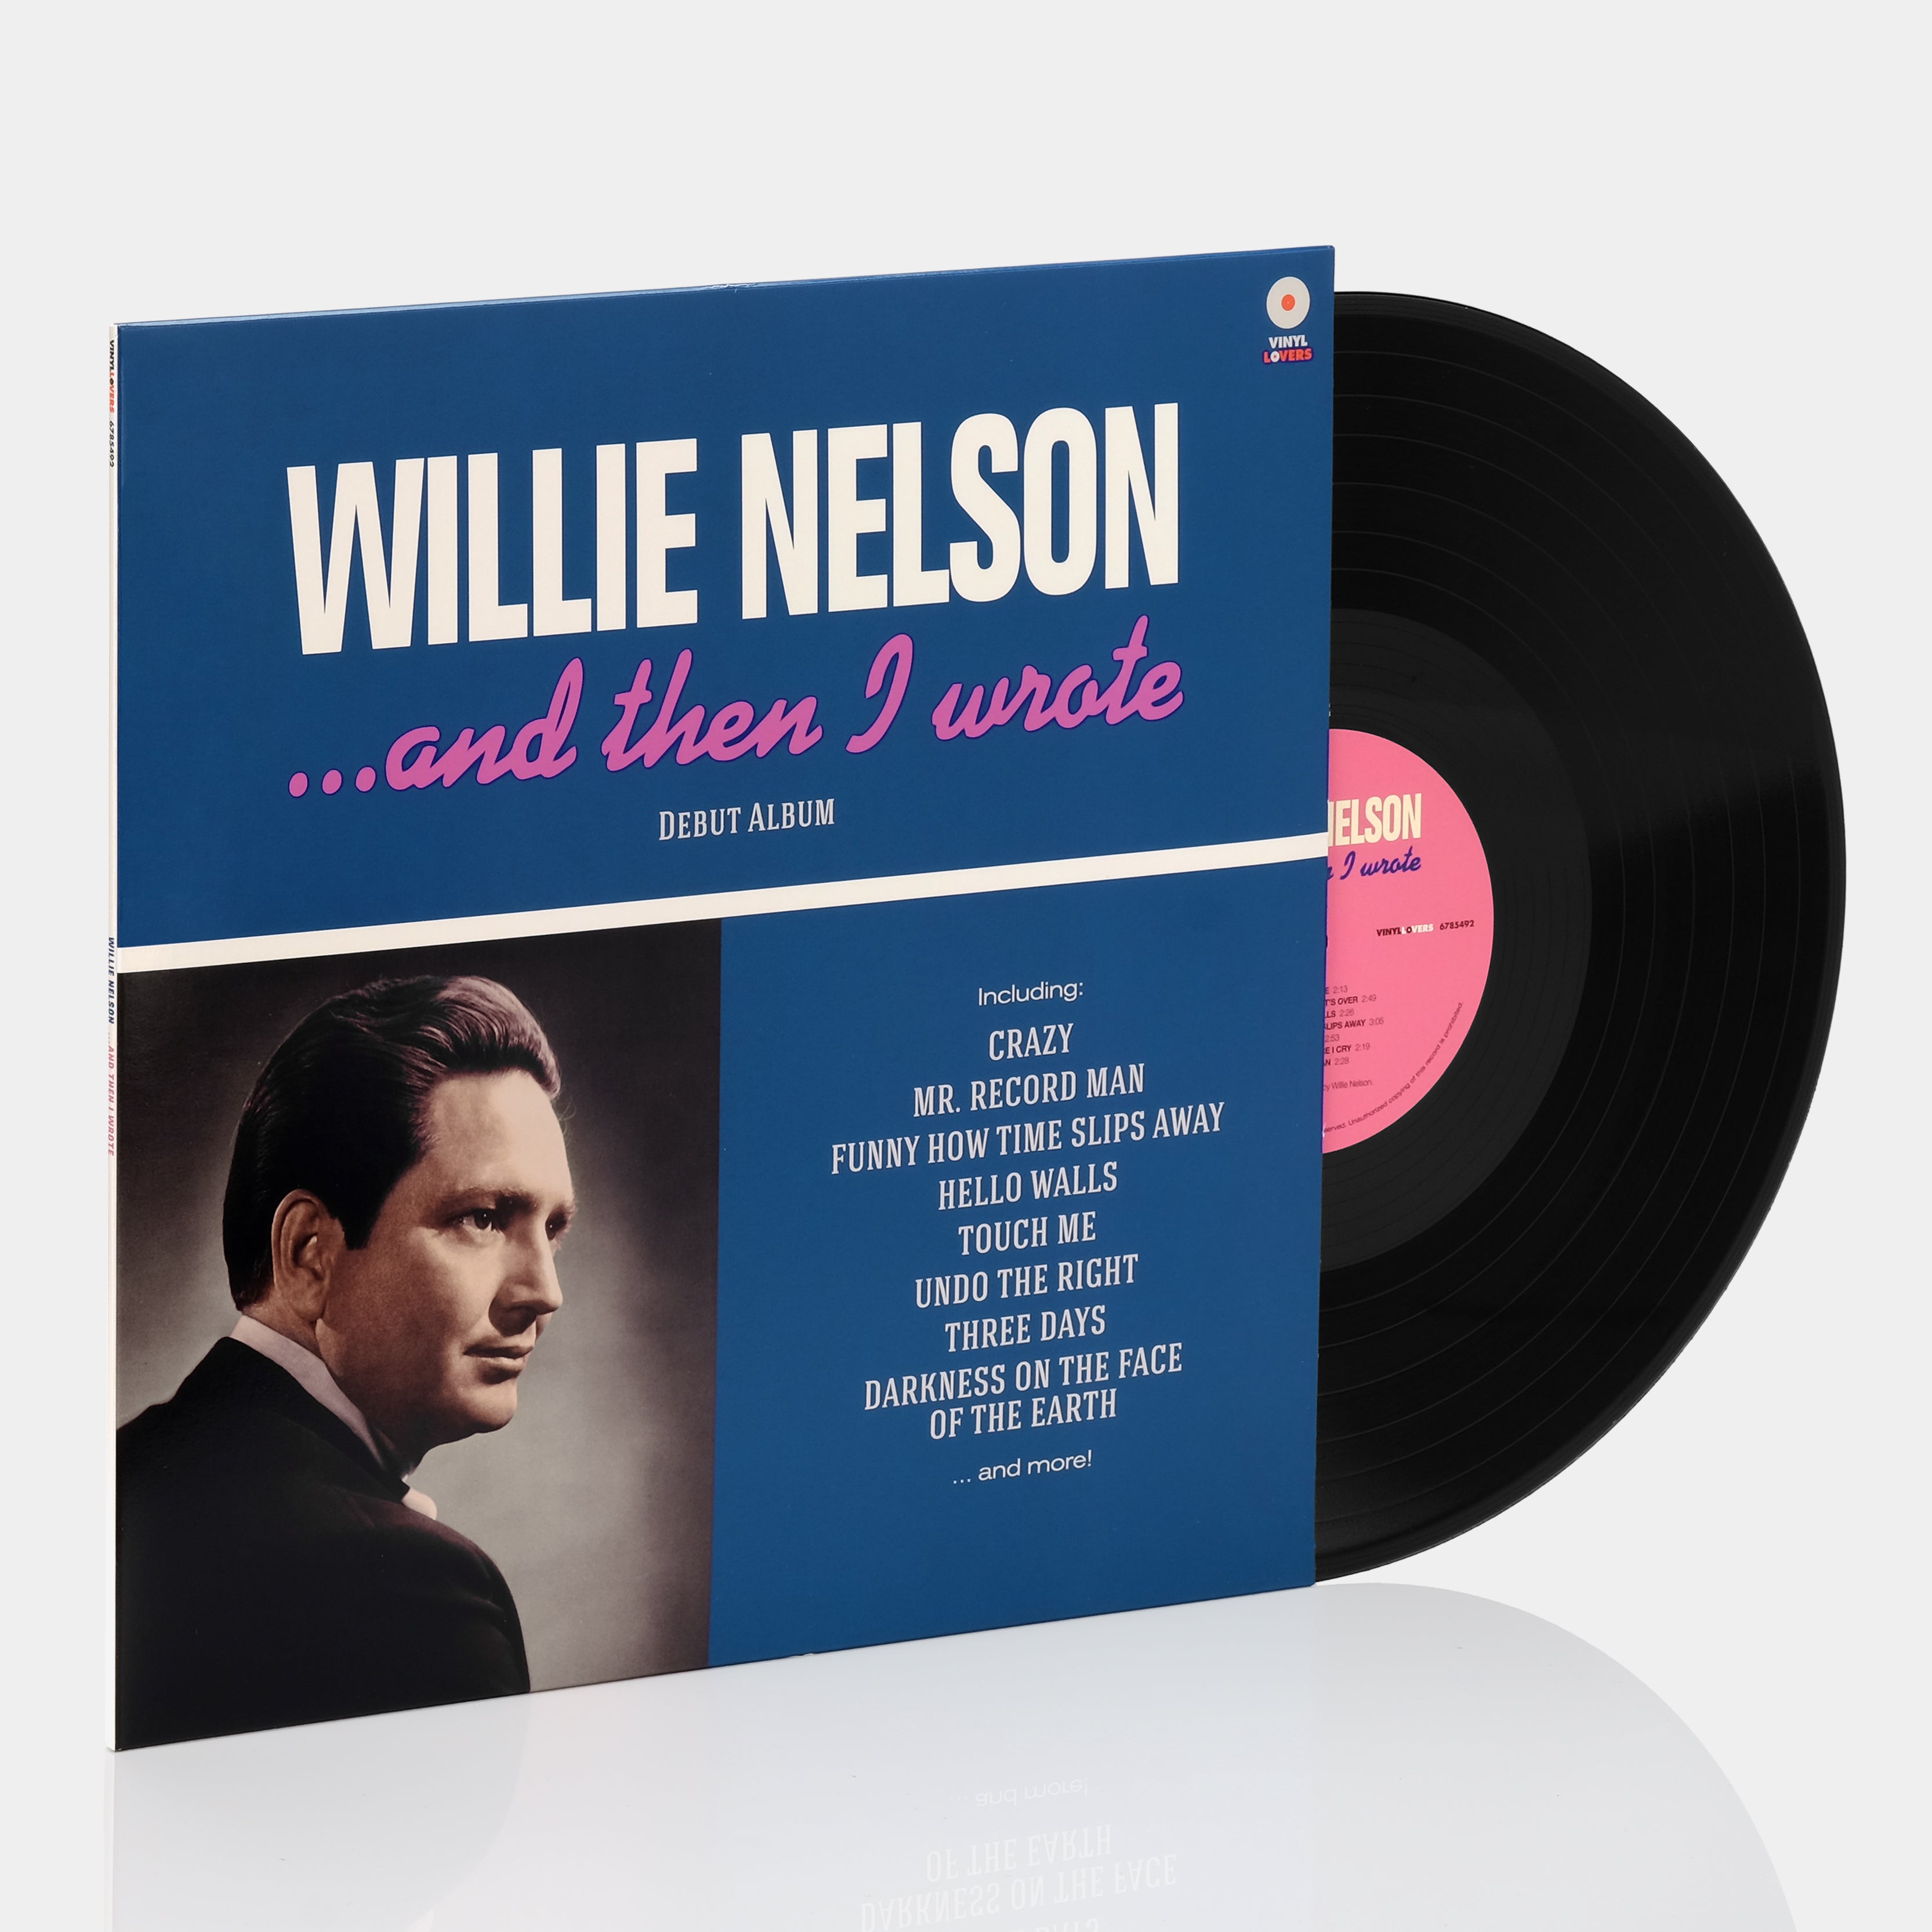 Willie Nelson - ... And Then I Wrote LP Vinyl Record